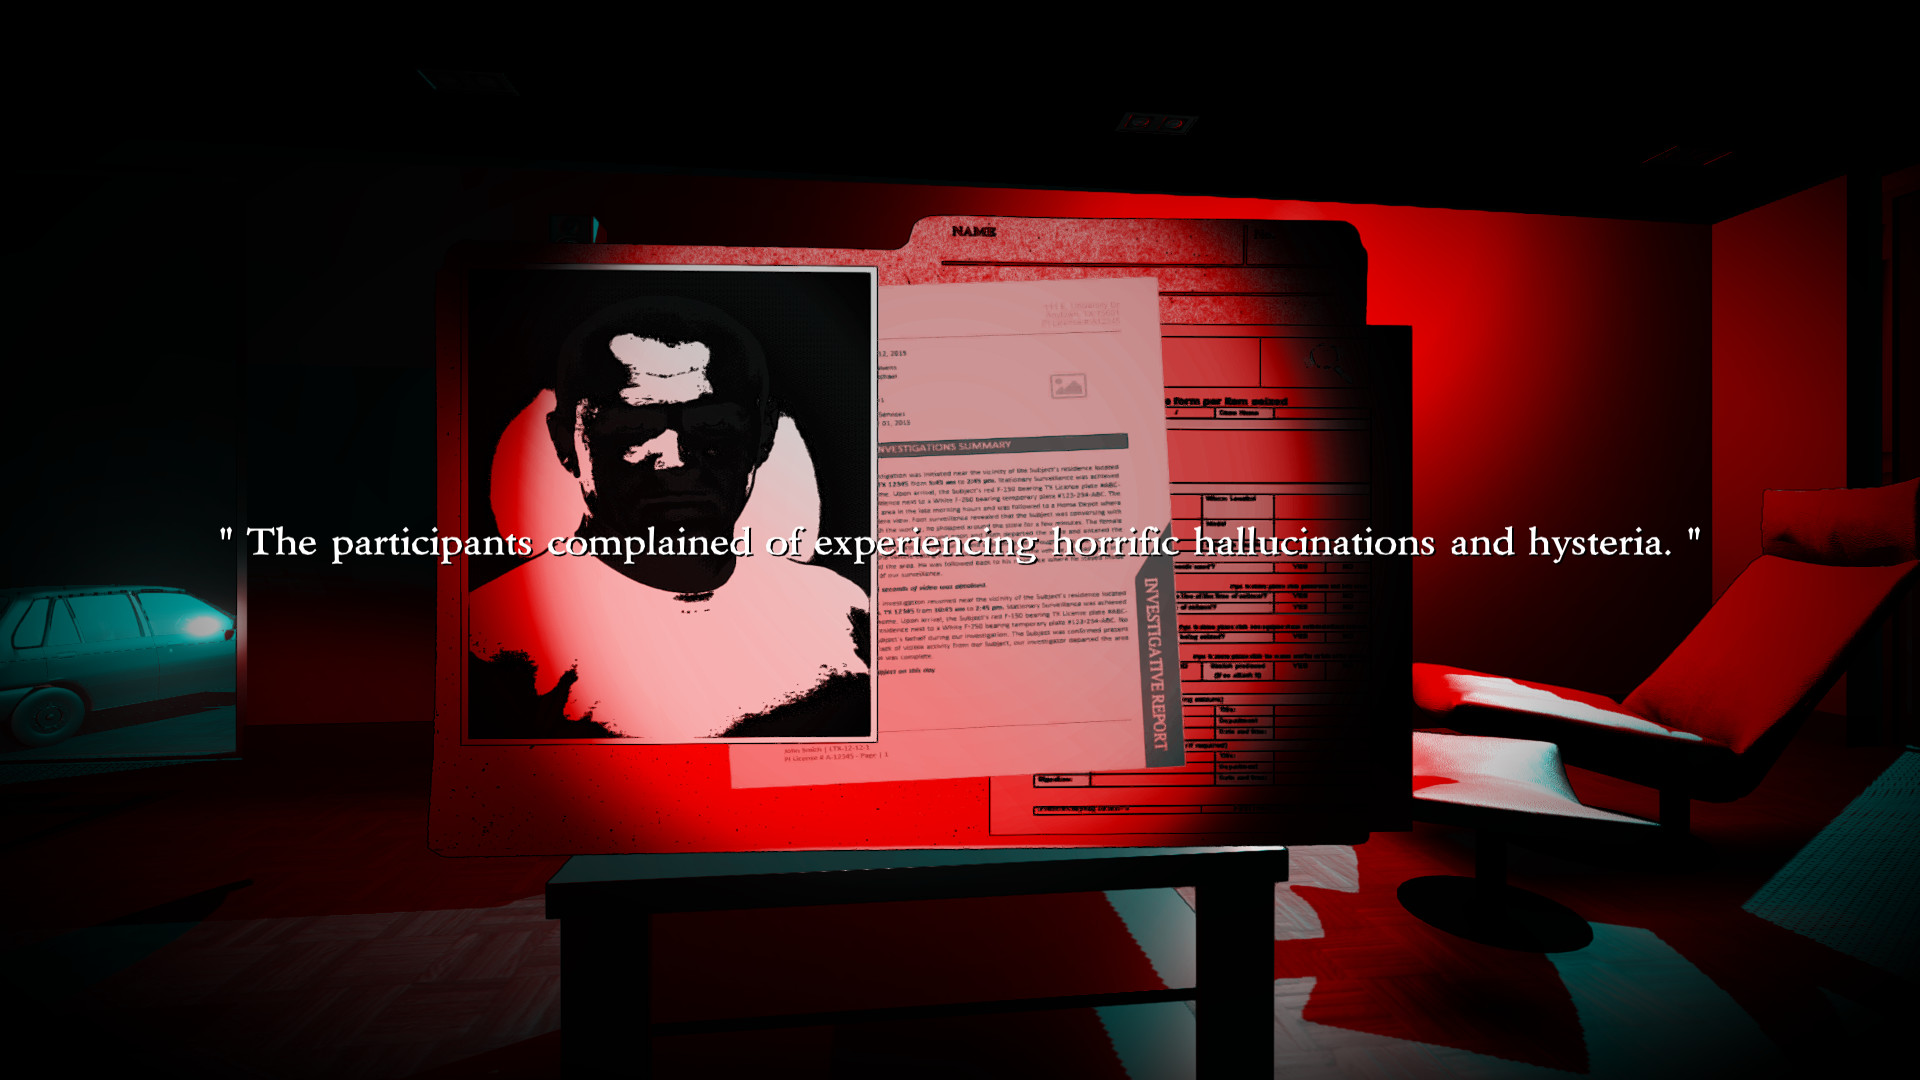 Midnight at the Red Light : An Investigation screenshot